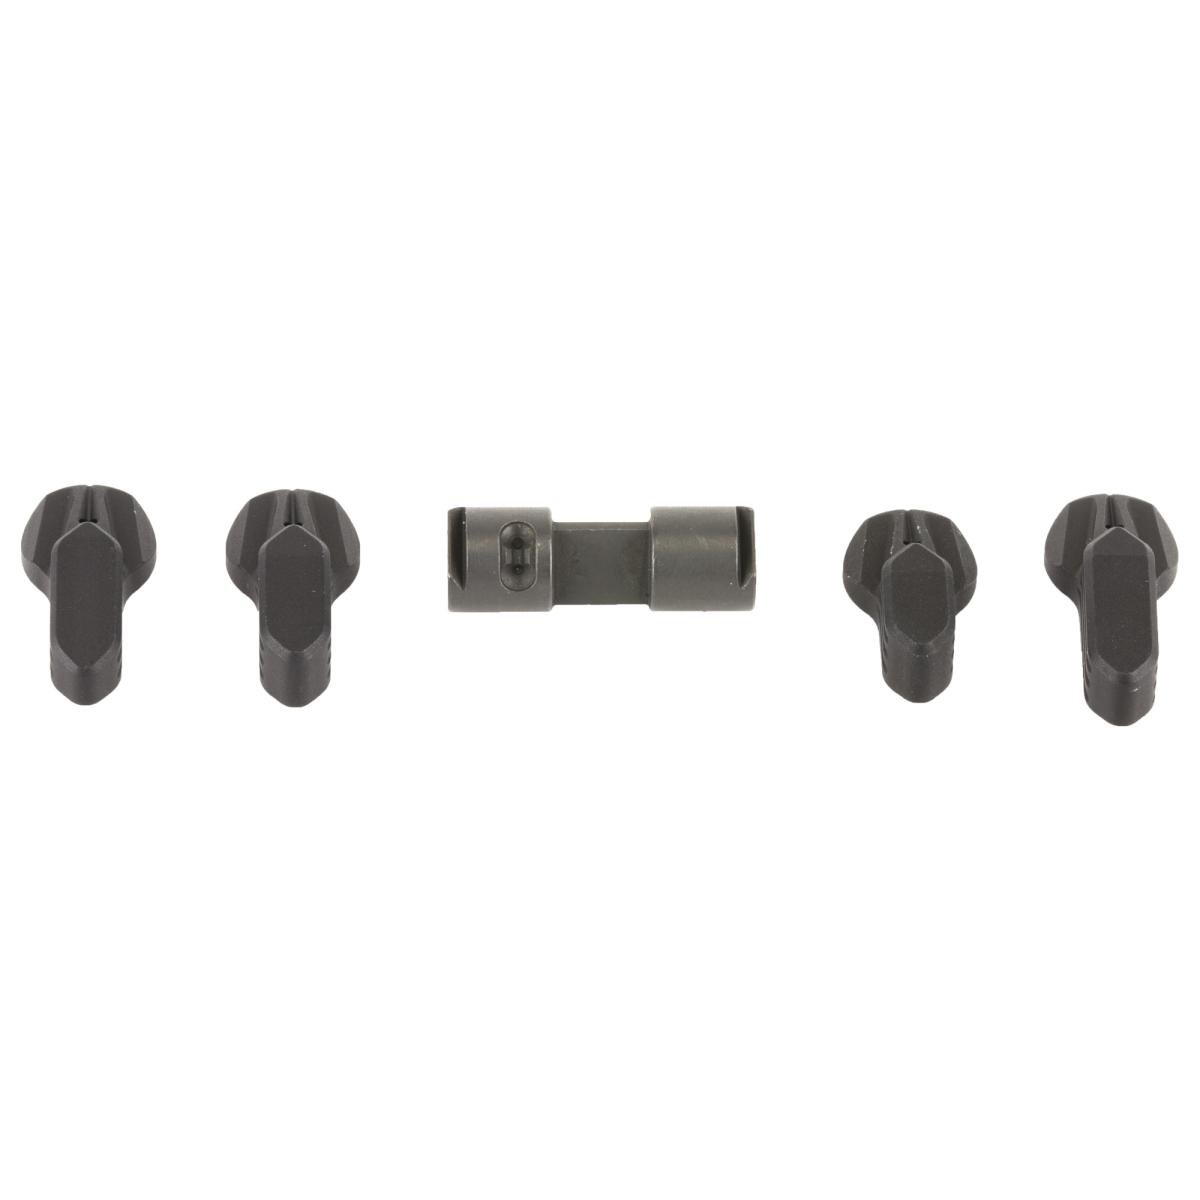 Radian Weapons Talon Safety Selector Ambidextrous 4 Lever Kit